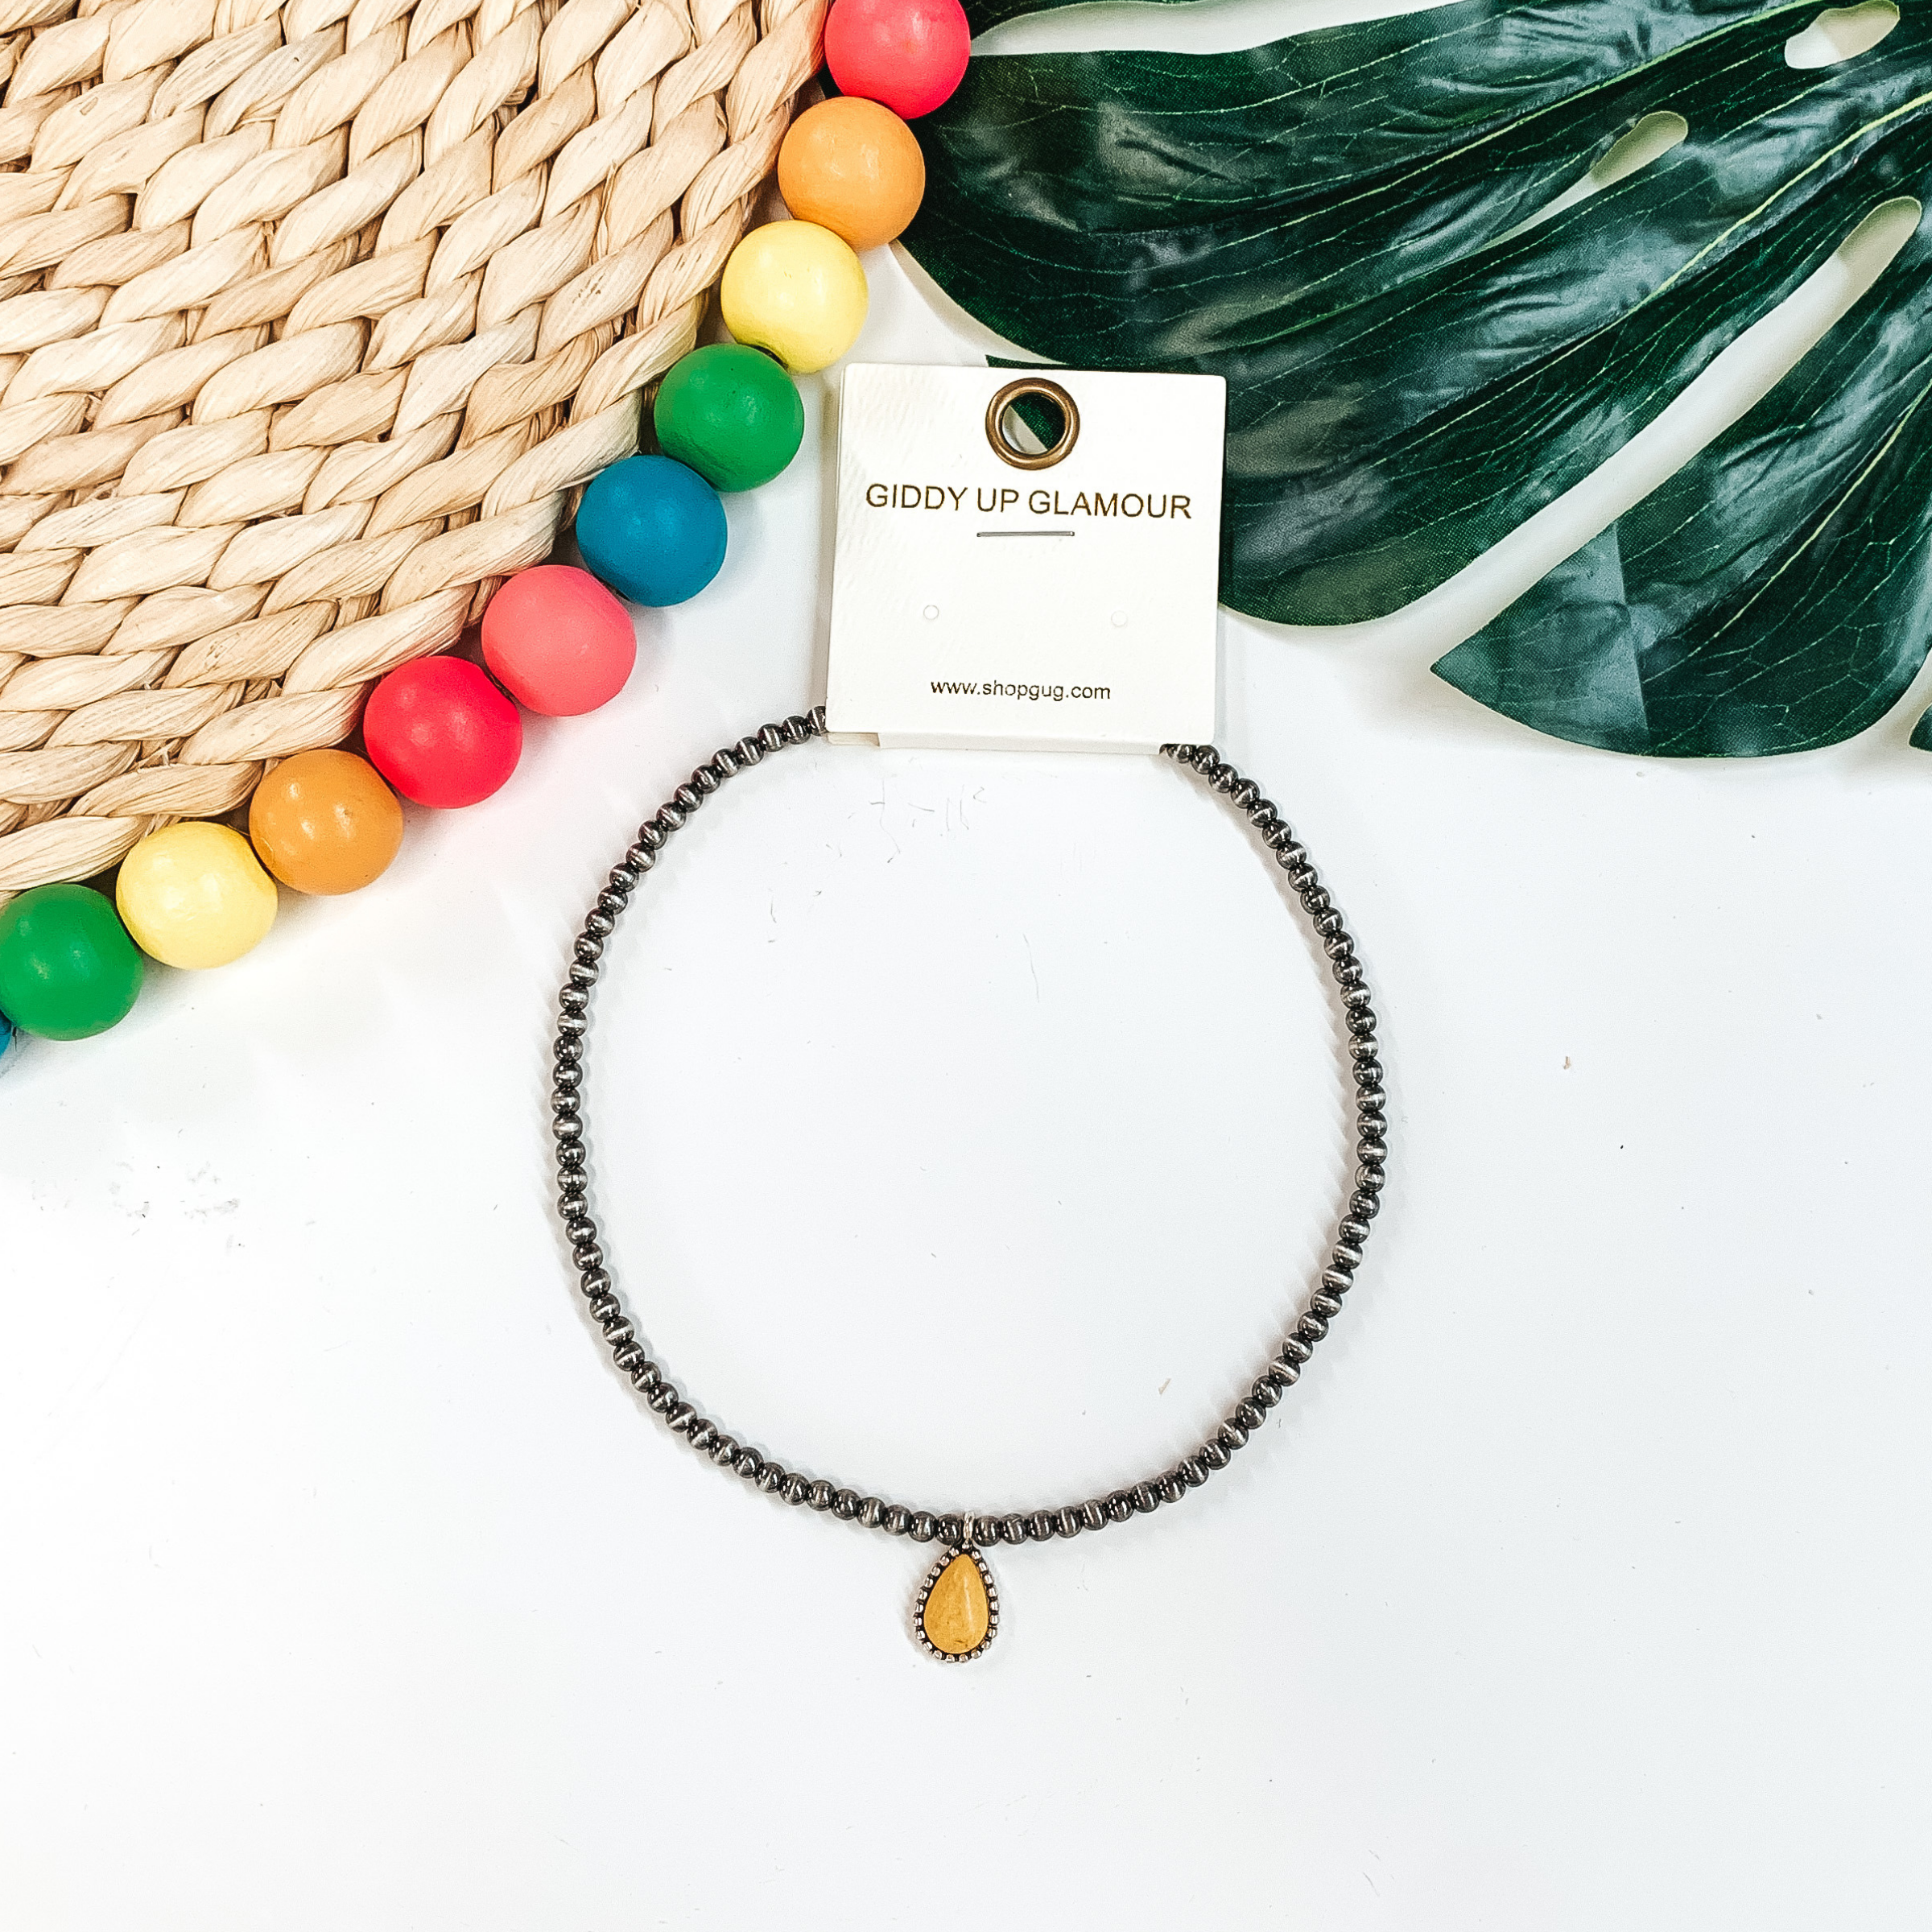 Navajo Inspired Choker with a Single Teardrop Stone in Yellow - Giddy Up Glamour Boutique